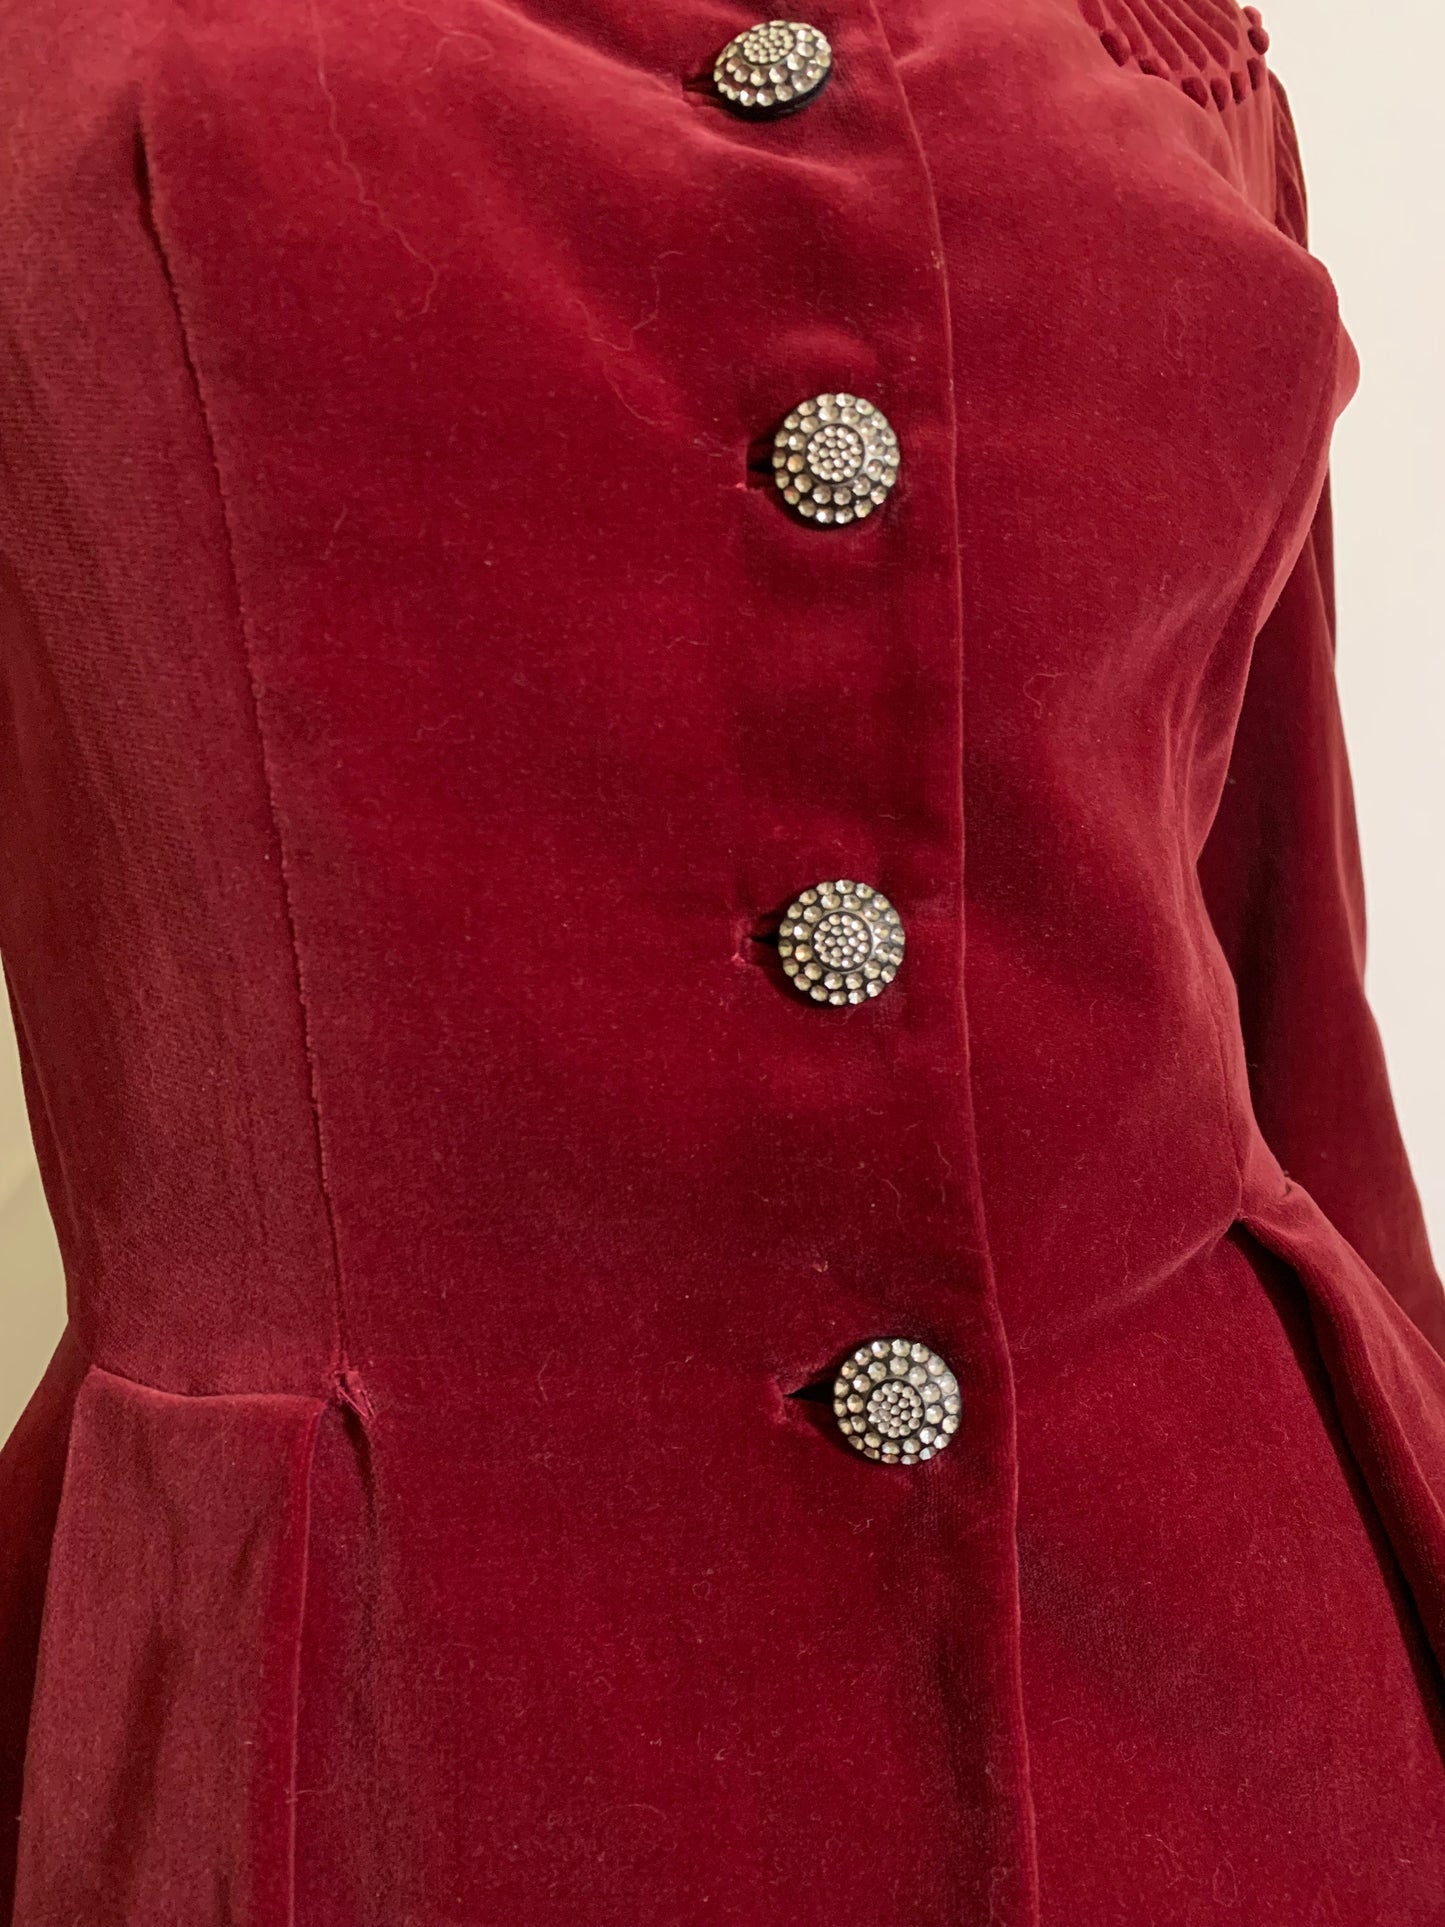 Plum Red Velvet Nipped Waist Suit with Trapunto Detailed Shoulders circa 1940s